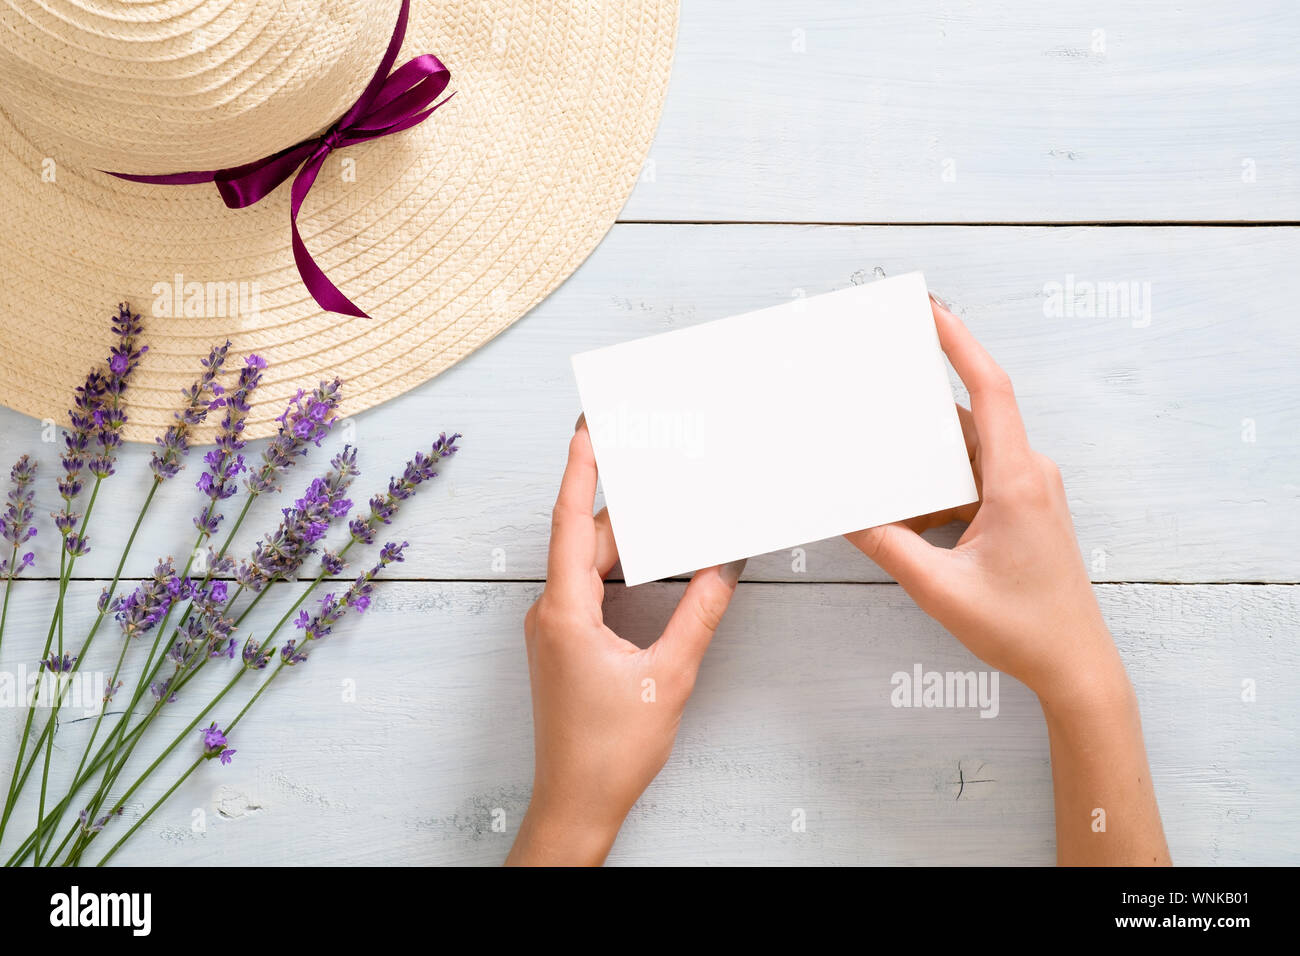 Hands of woman holding blank paper card mockup over rustic blue wooden background with straw hat and lavender flowers. Flat lay, top view, overhead. S Stock Photo